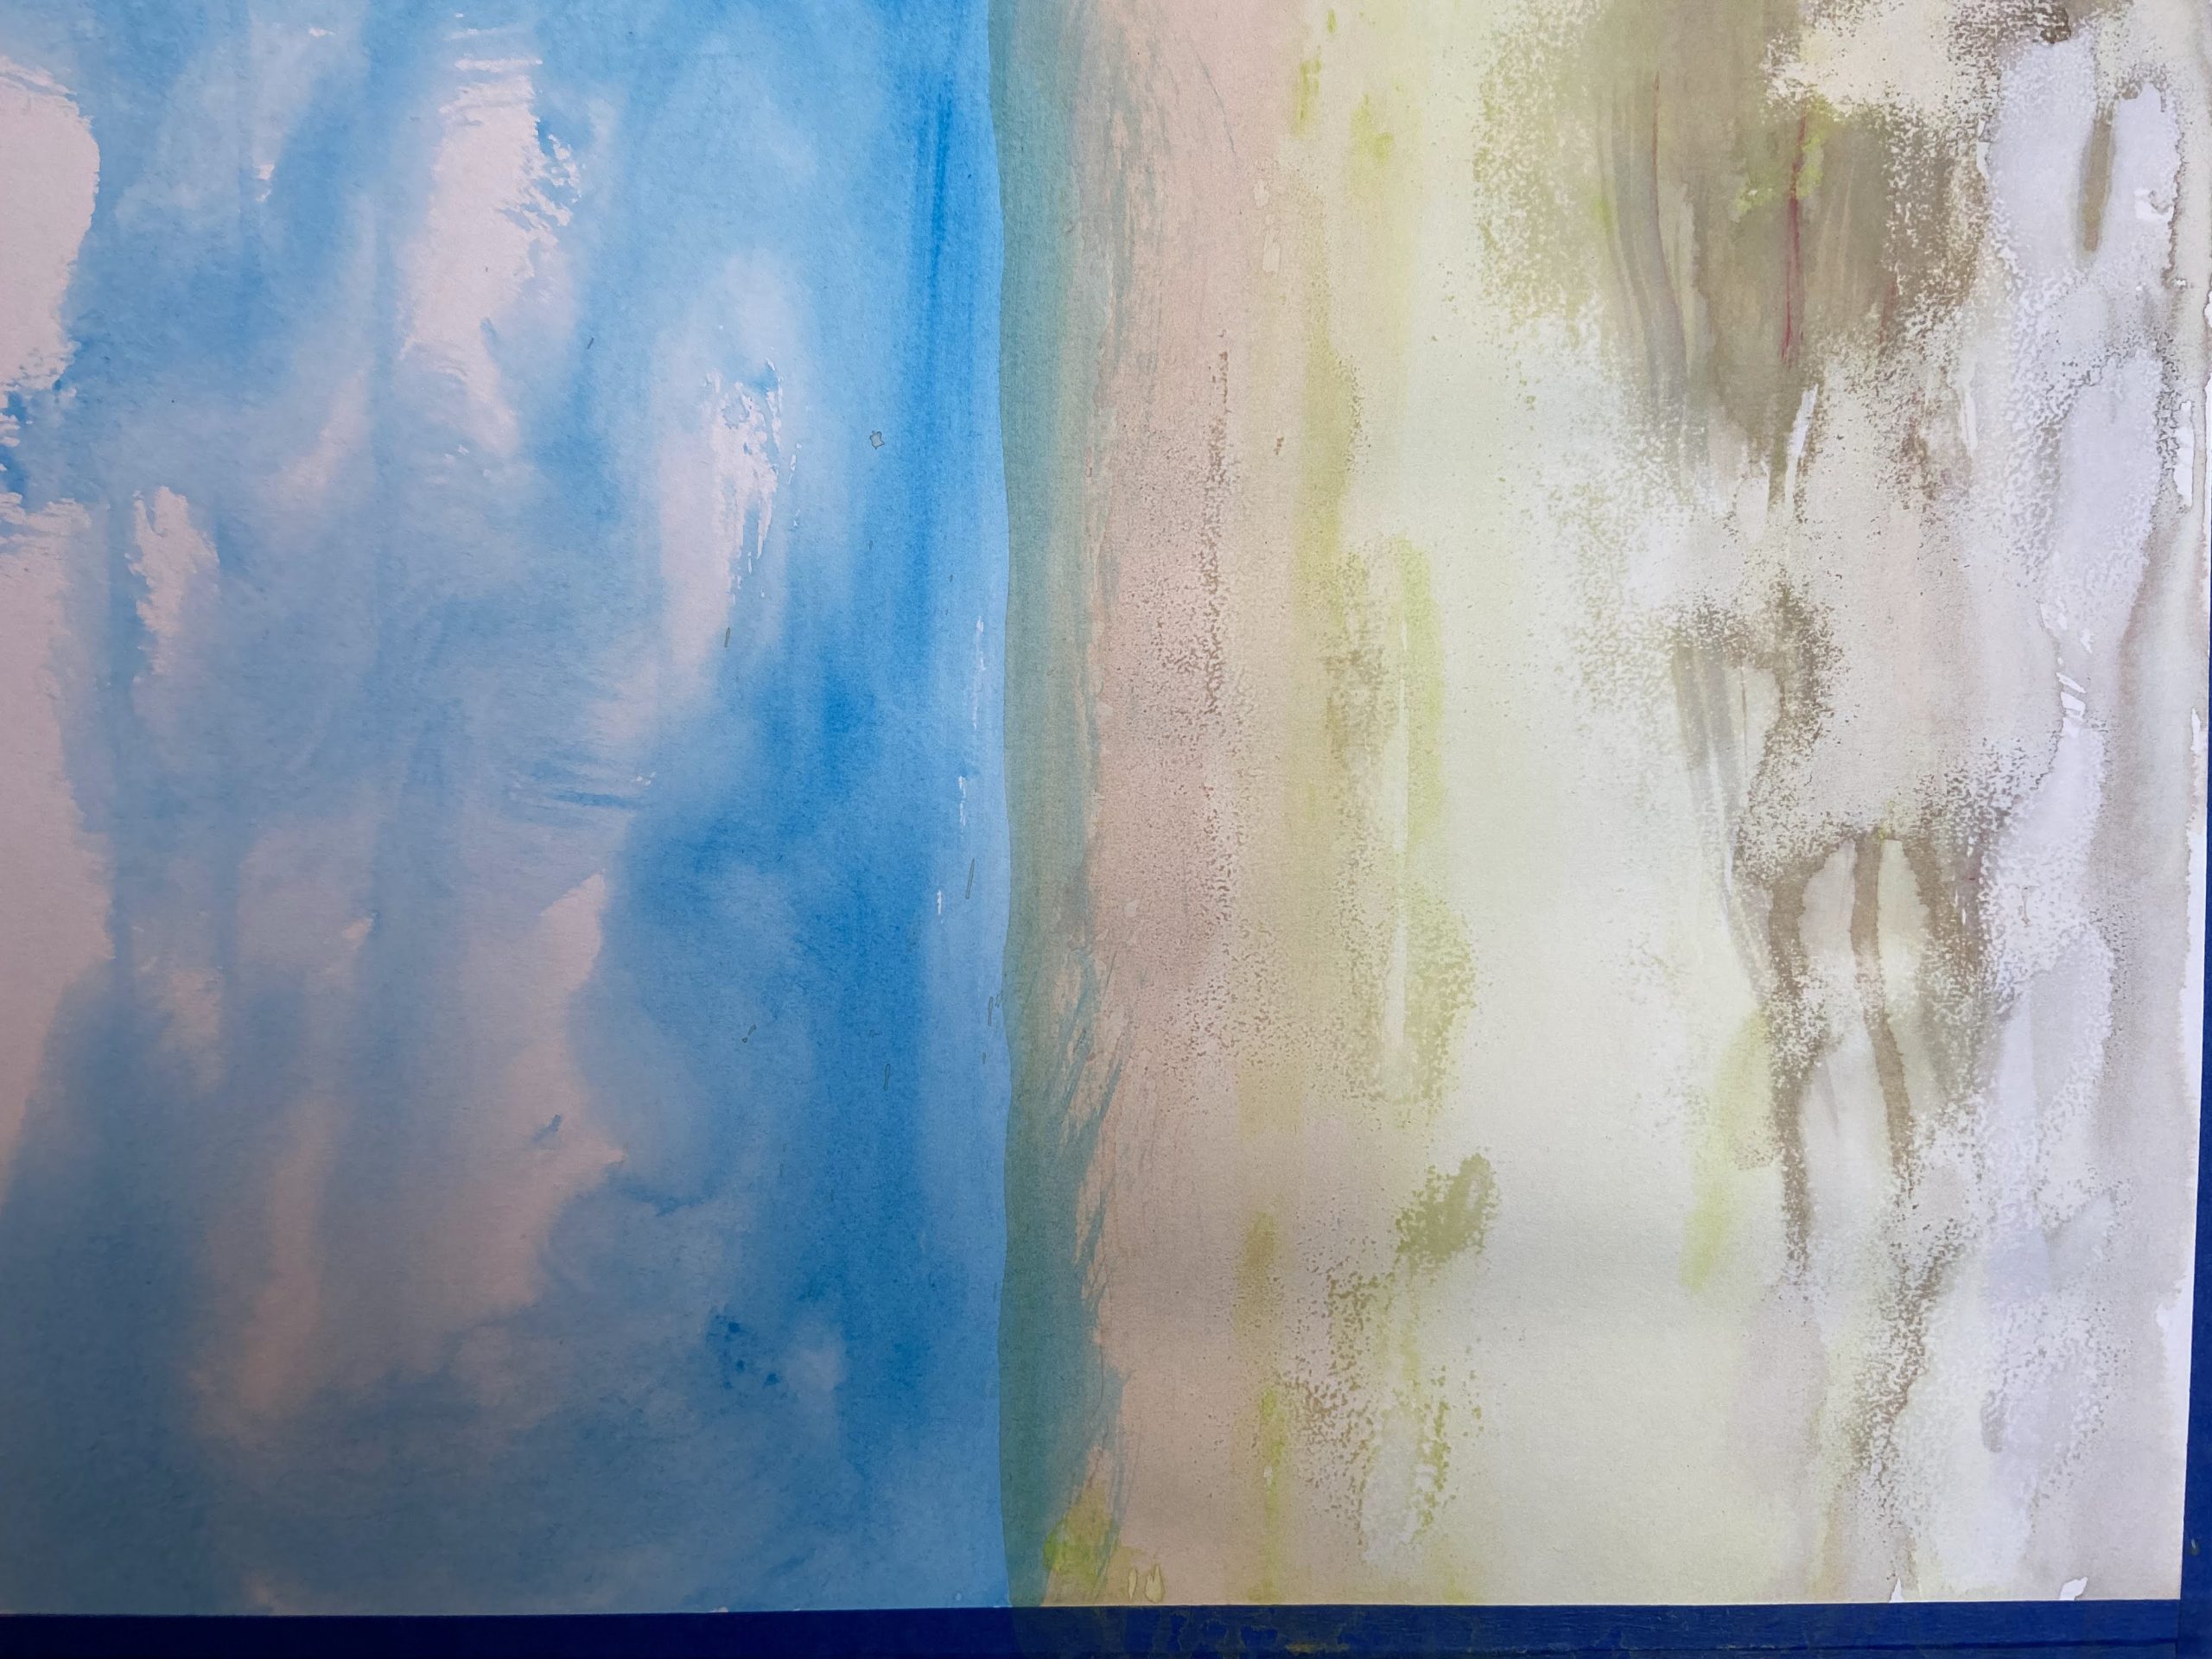 Background painting with acrylic layers in blues, reds, and greens.